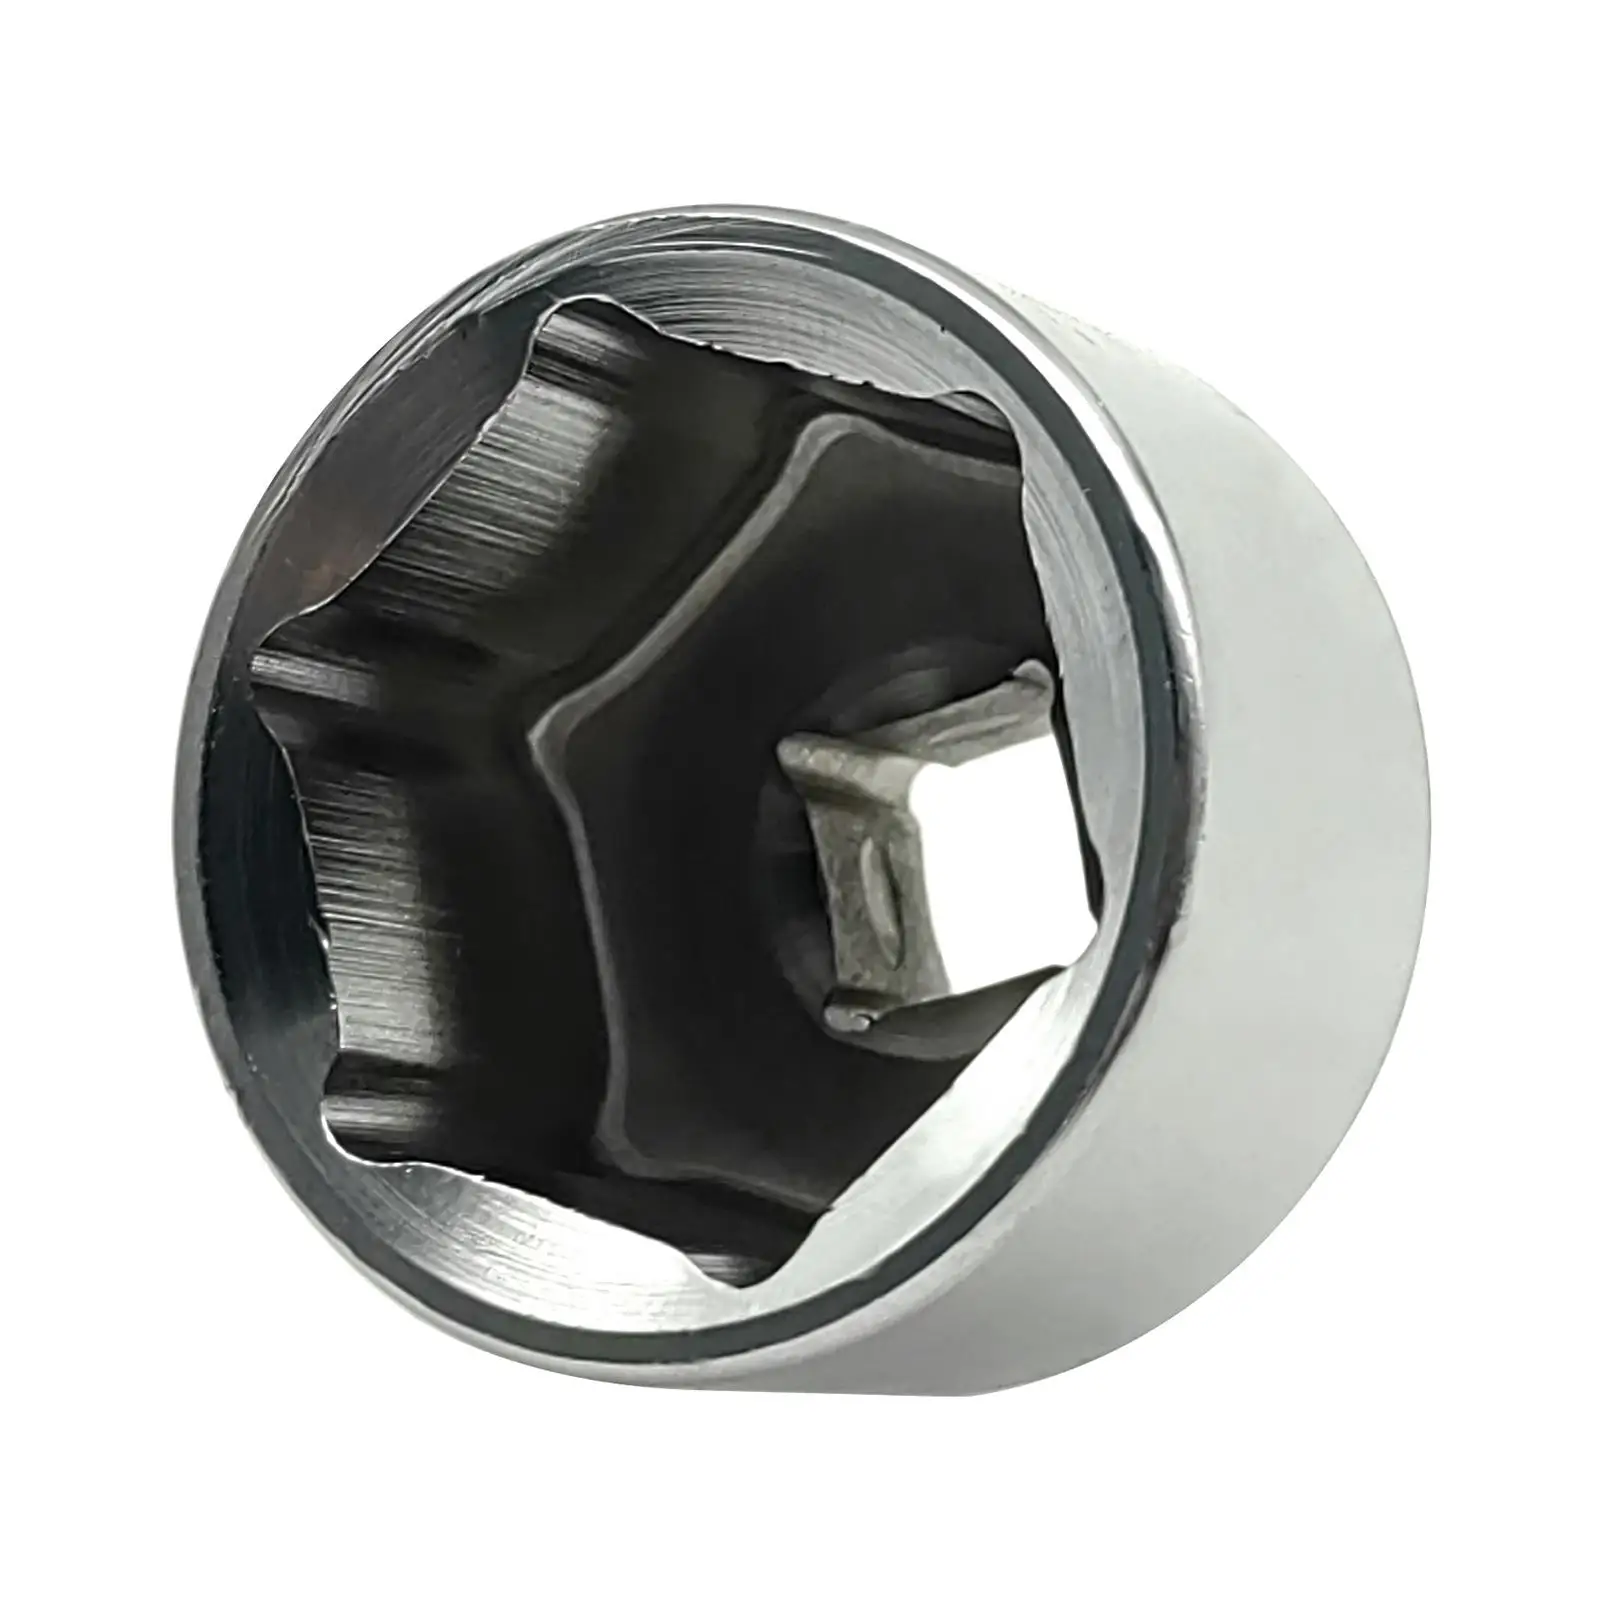 27mm Low Profile Filter Socket for Ford All 27mm Oil Filter Caps